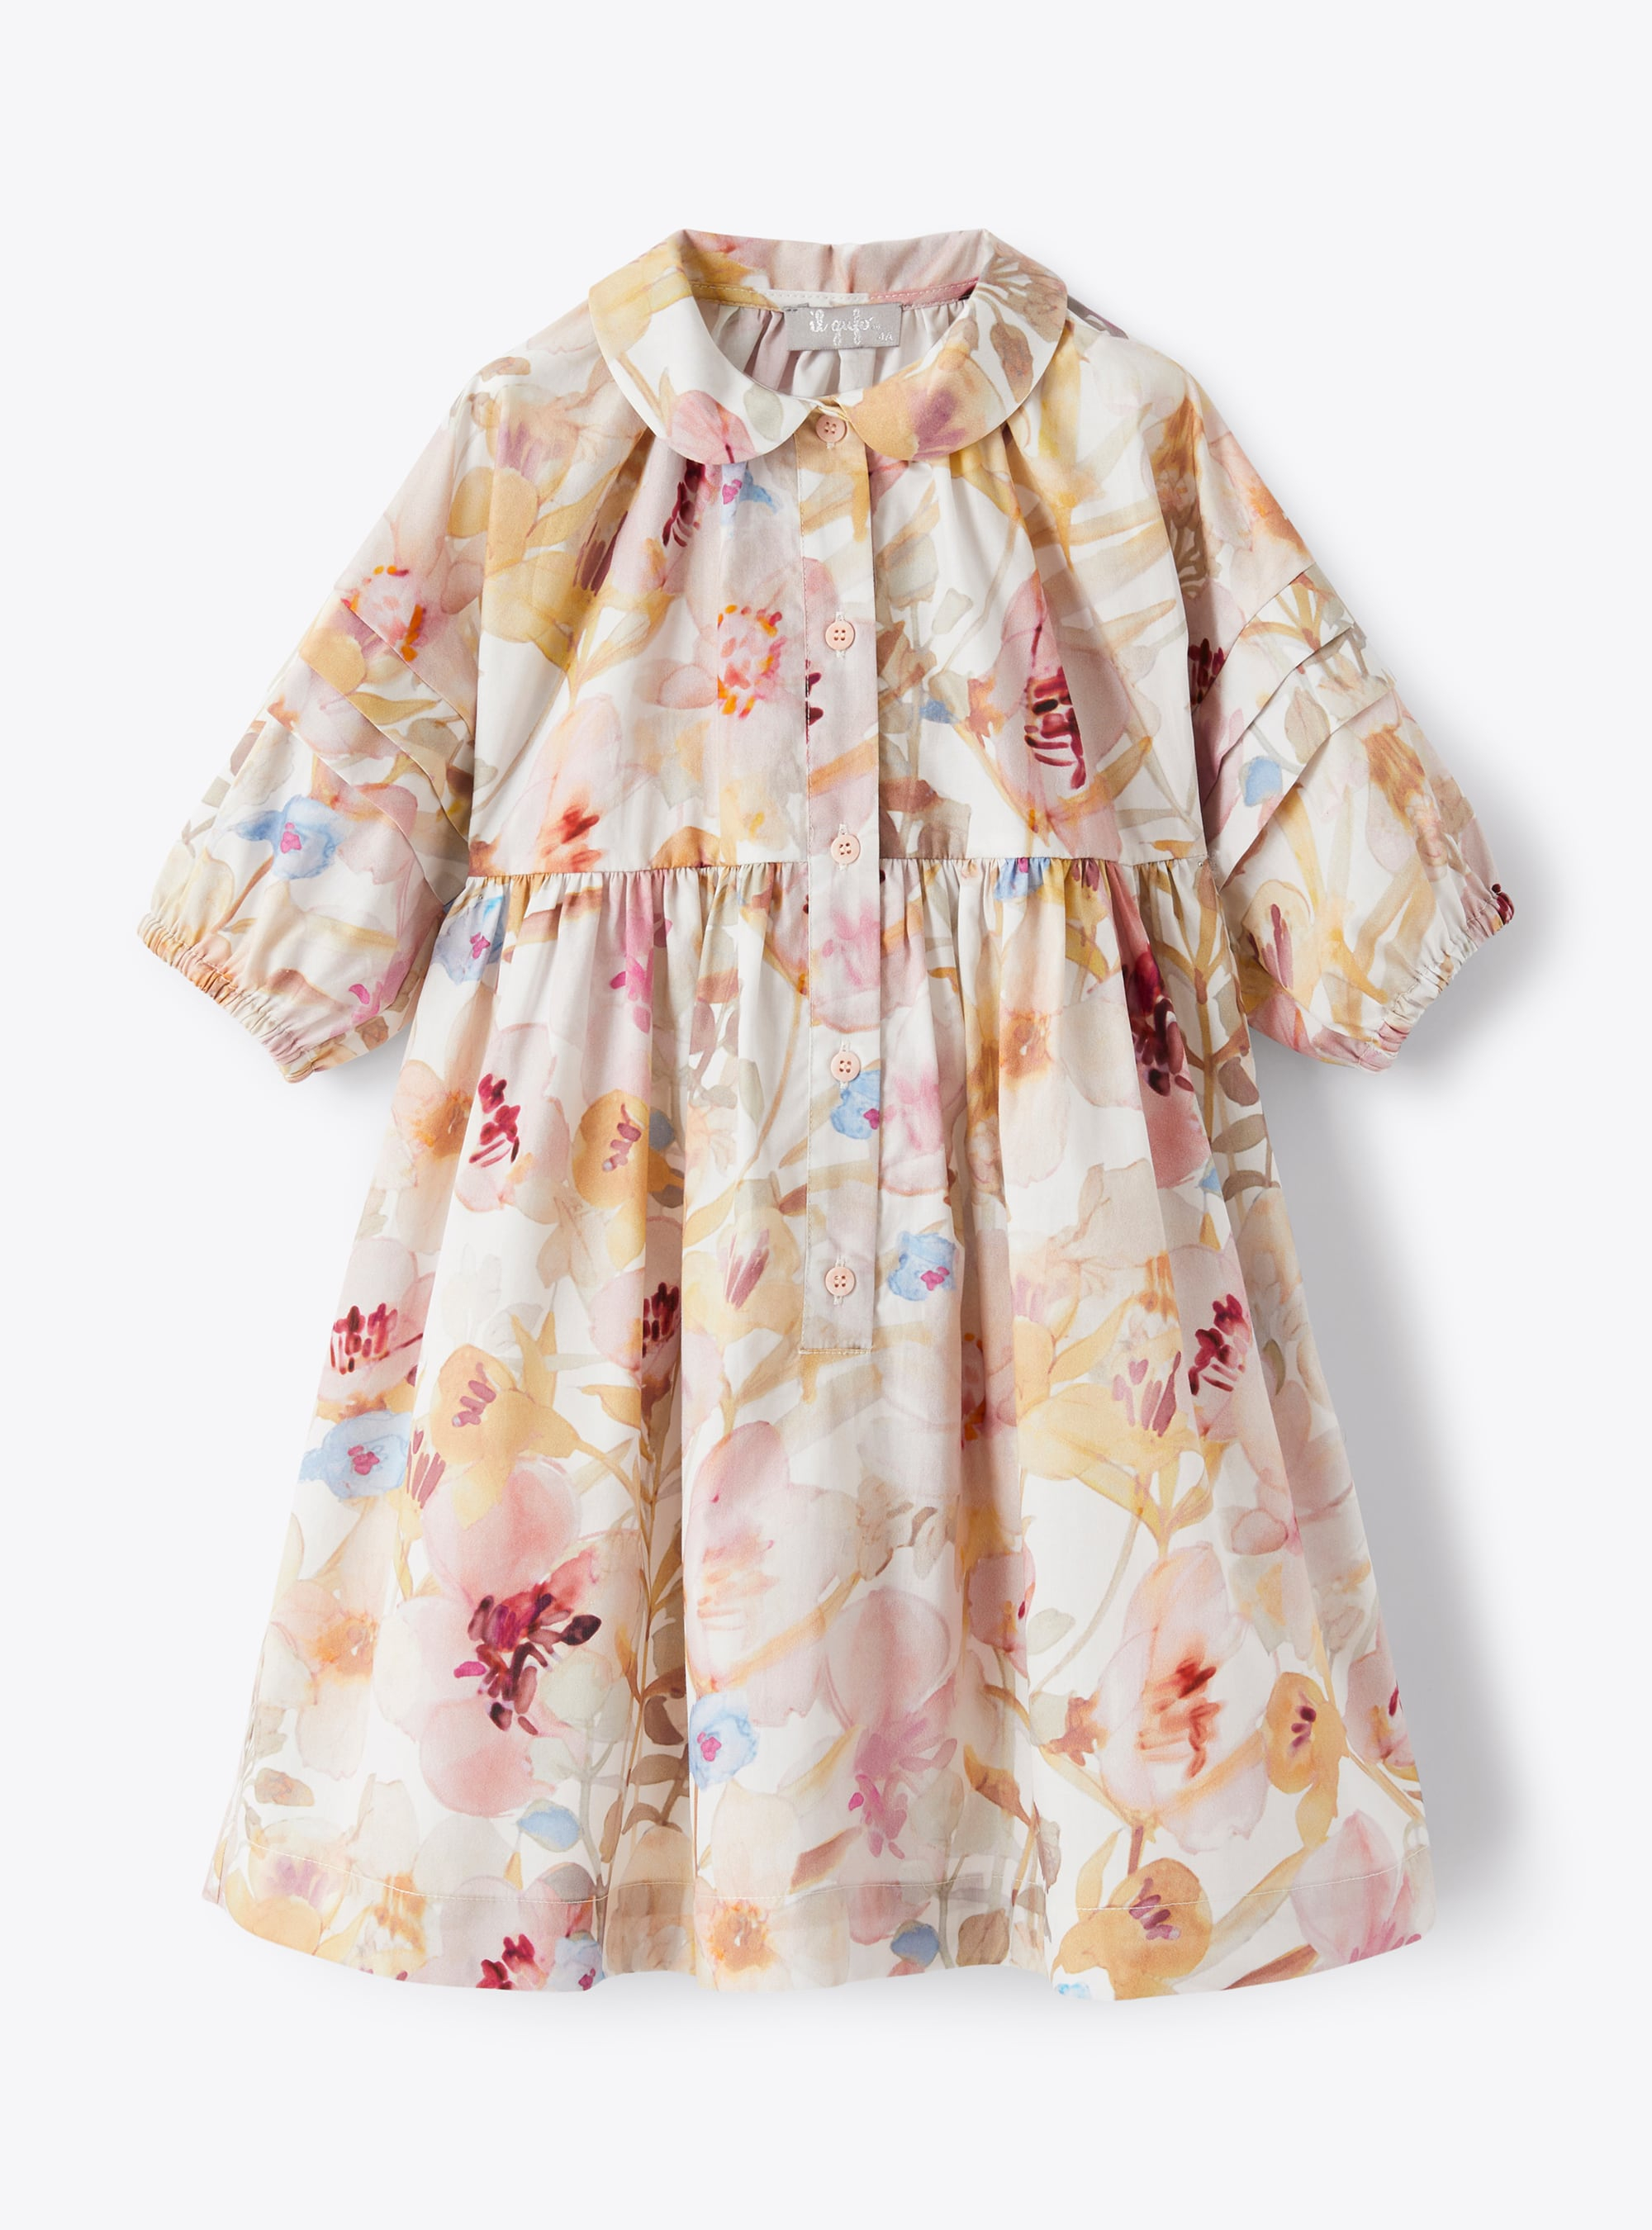 Cotton dress with floral patterning - Dresses - Il Gufo